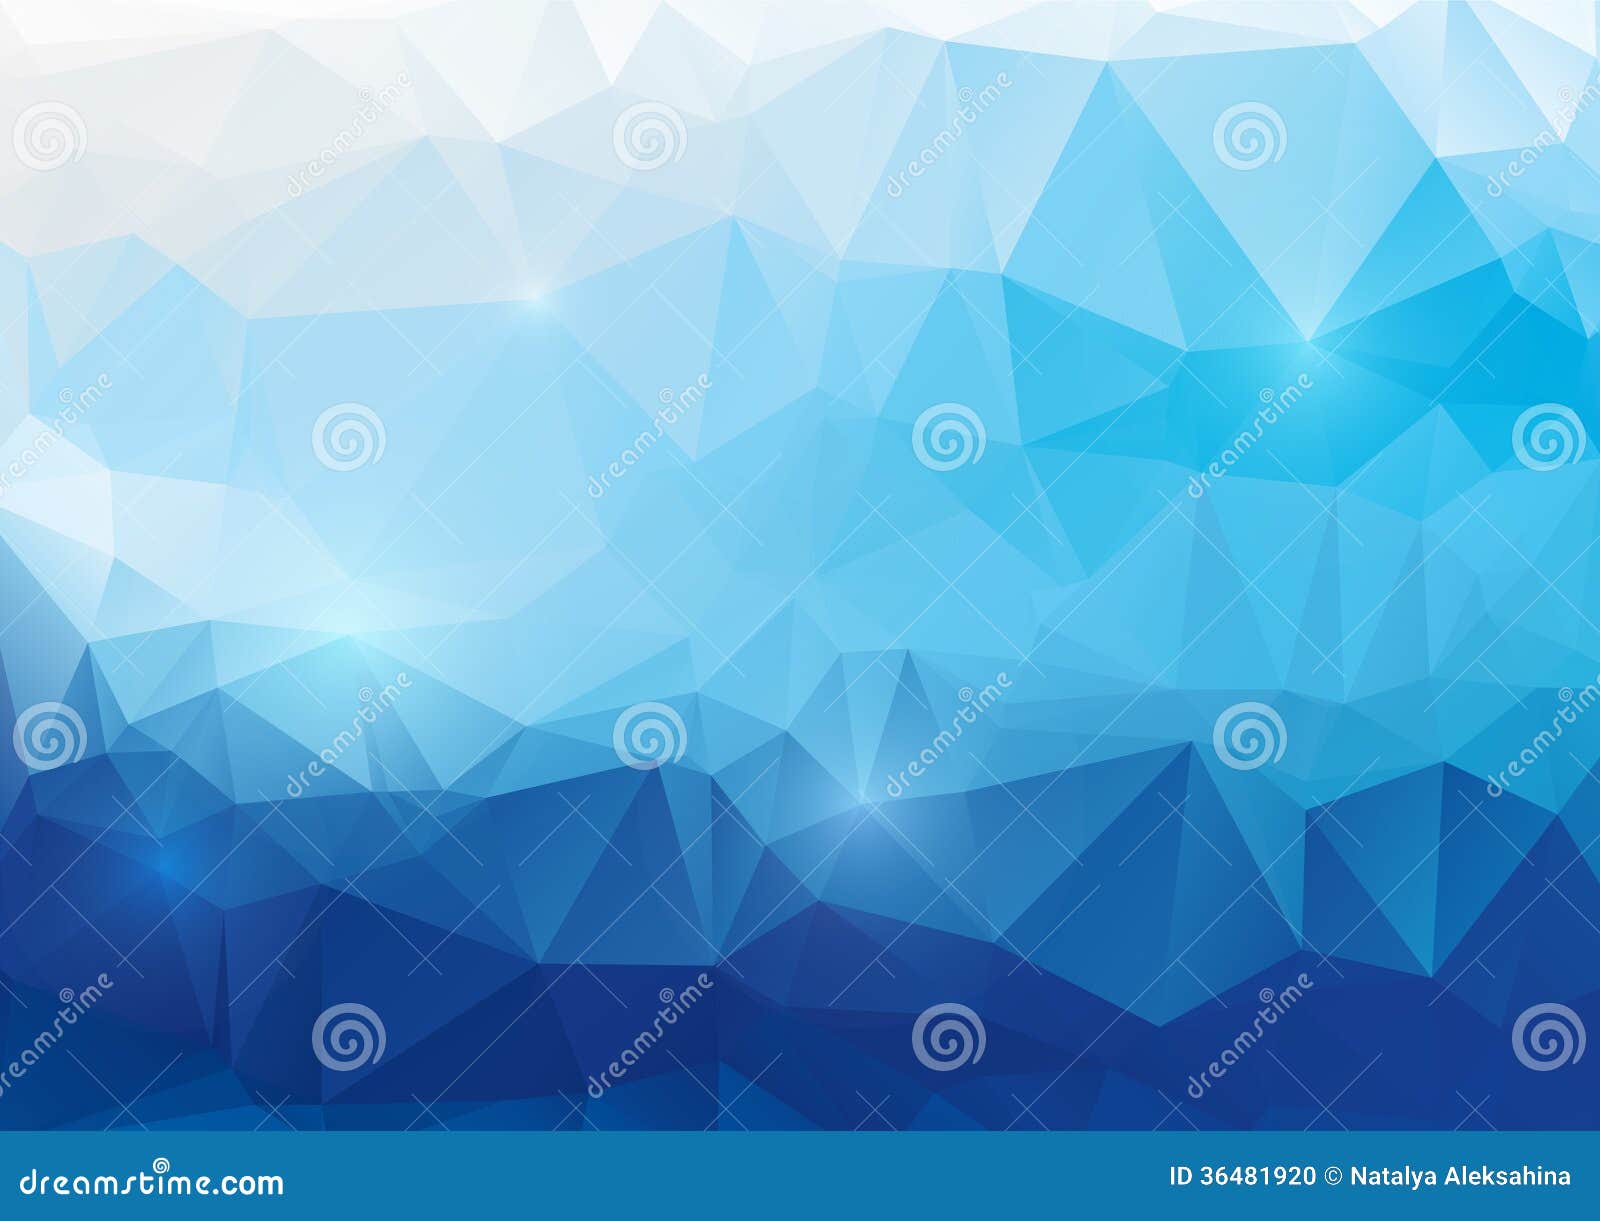 blue abstract polygonal background